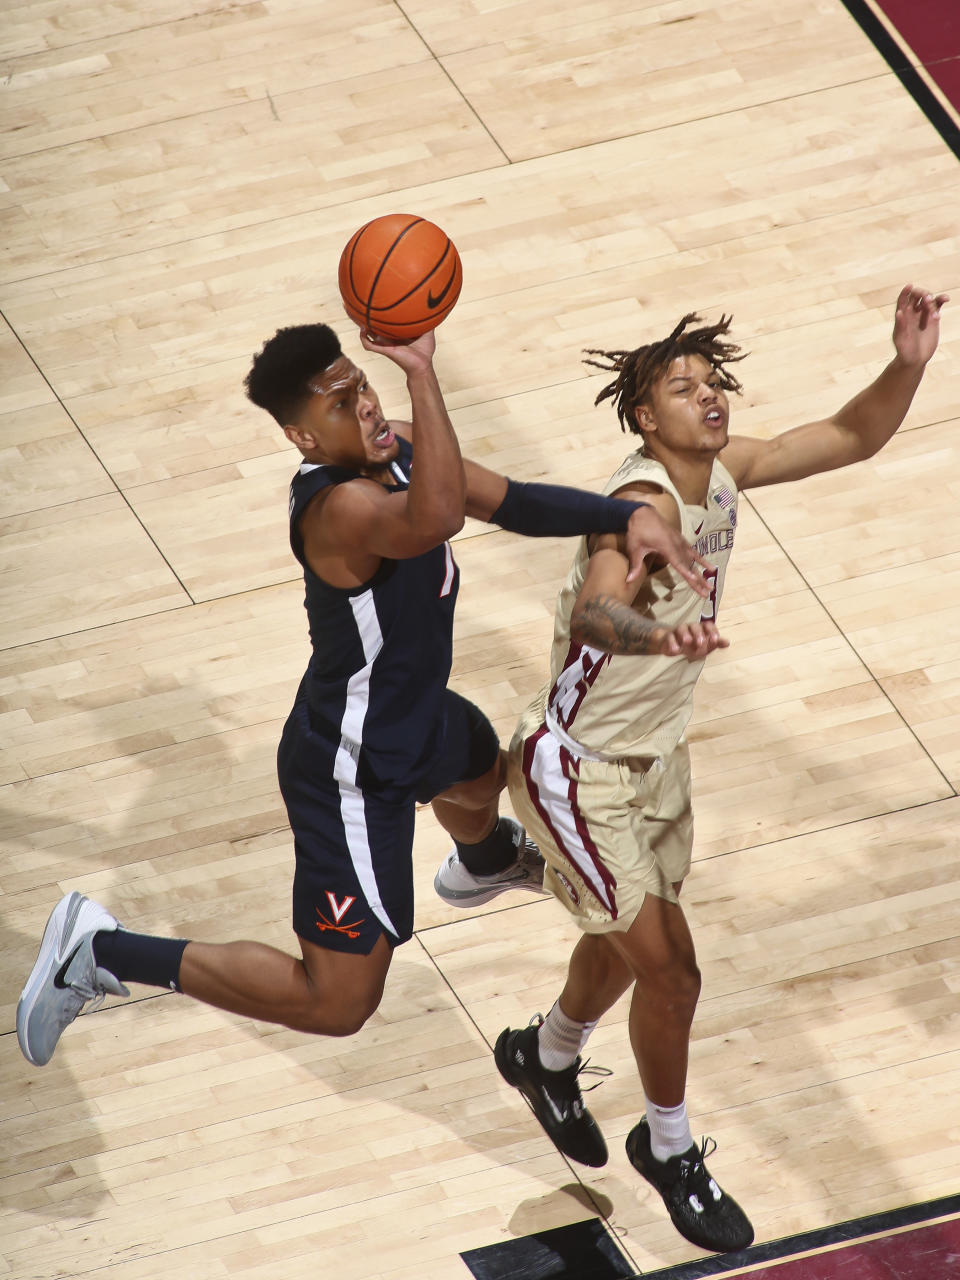 Virginia forward Jayden Gardner (1) misses a layup as he is defended by Florida State forward Cameron Corhen (3) in the first half of an NCAA college basketball game in Tallahassee, Fla., Saturday, Jan. 14, 2023. (AP Photo/Phil Sears)